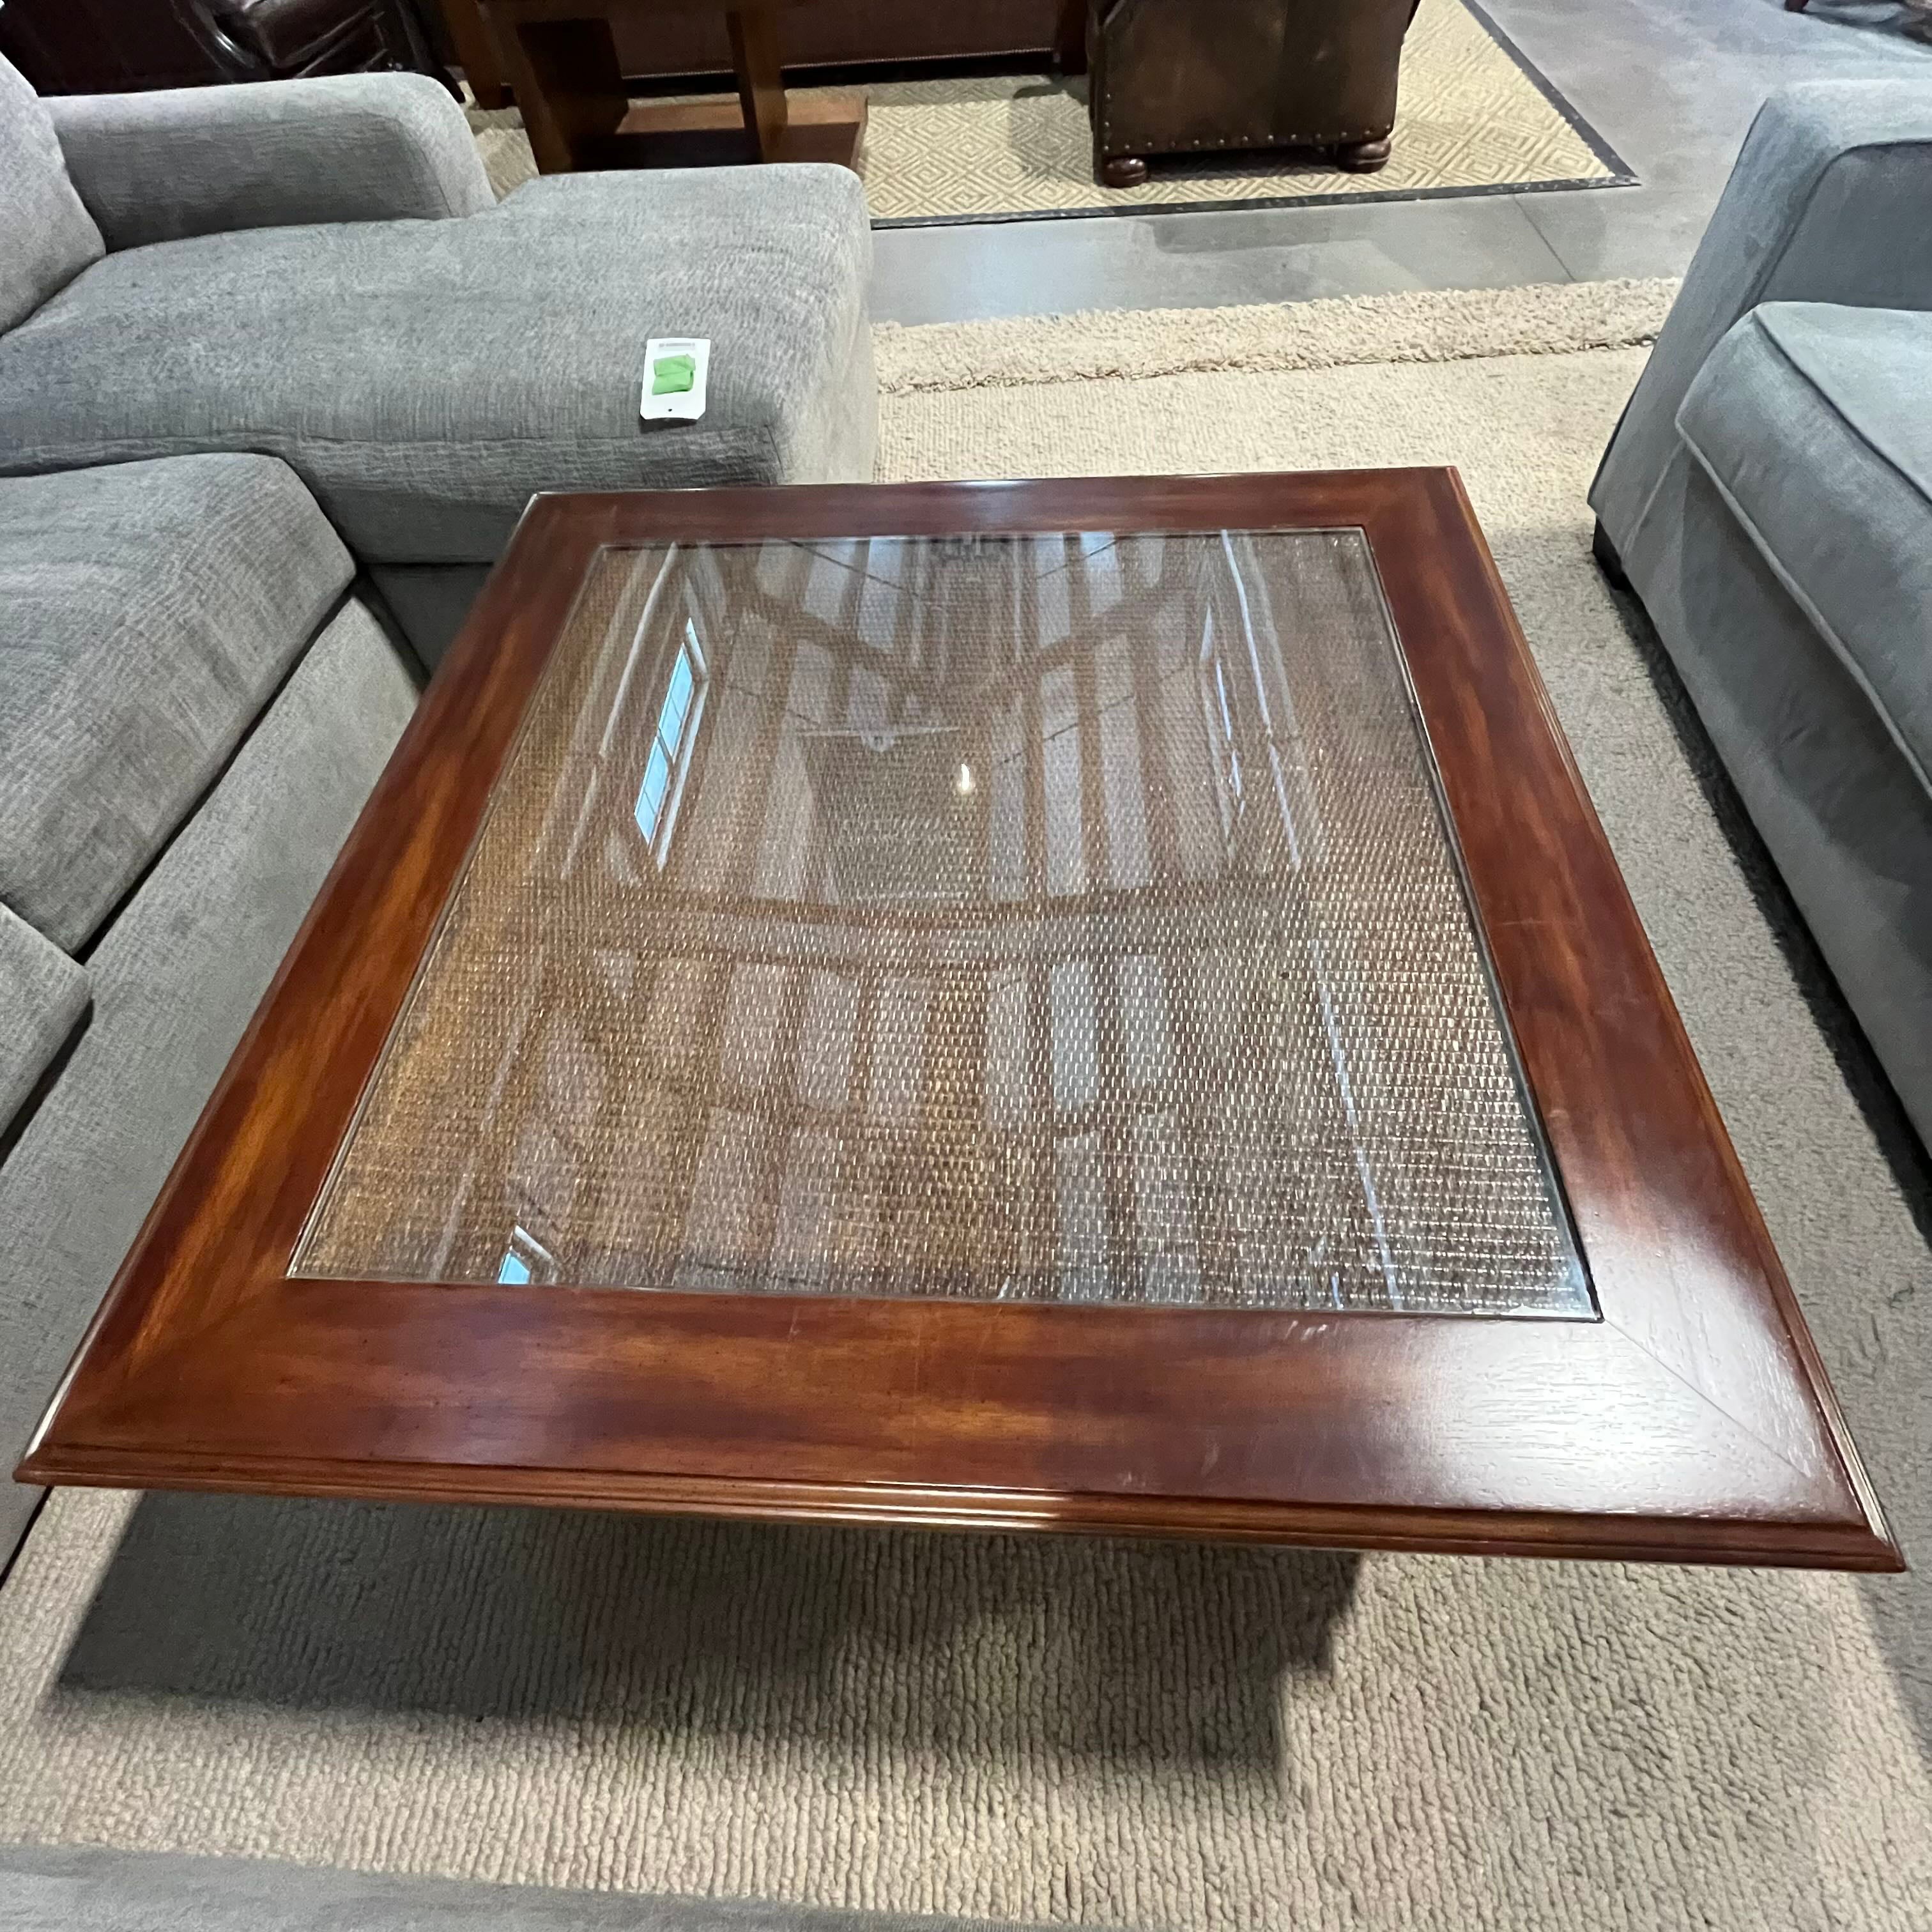 40"x 40"x 20" Carved Wood Inset Wicker & Glass Top Coffee Table